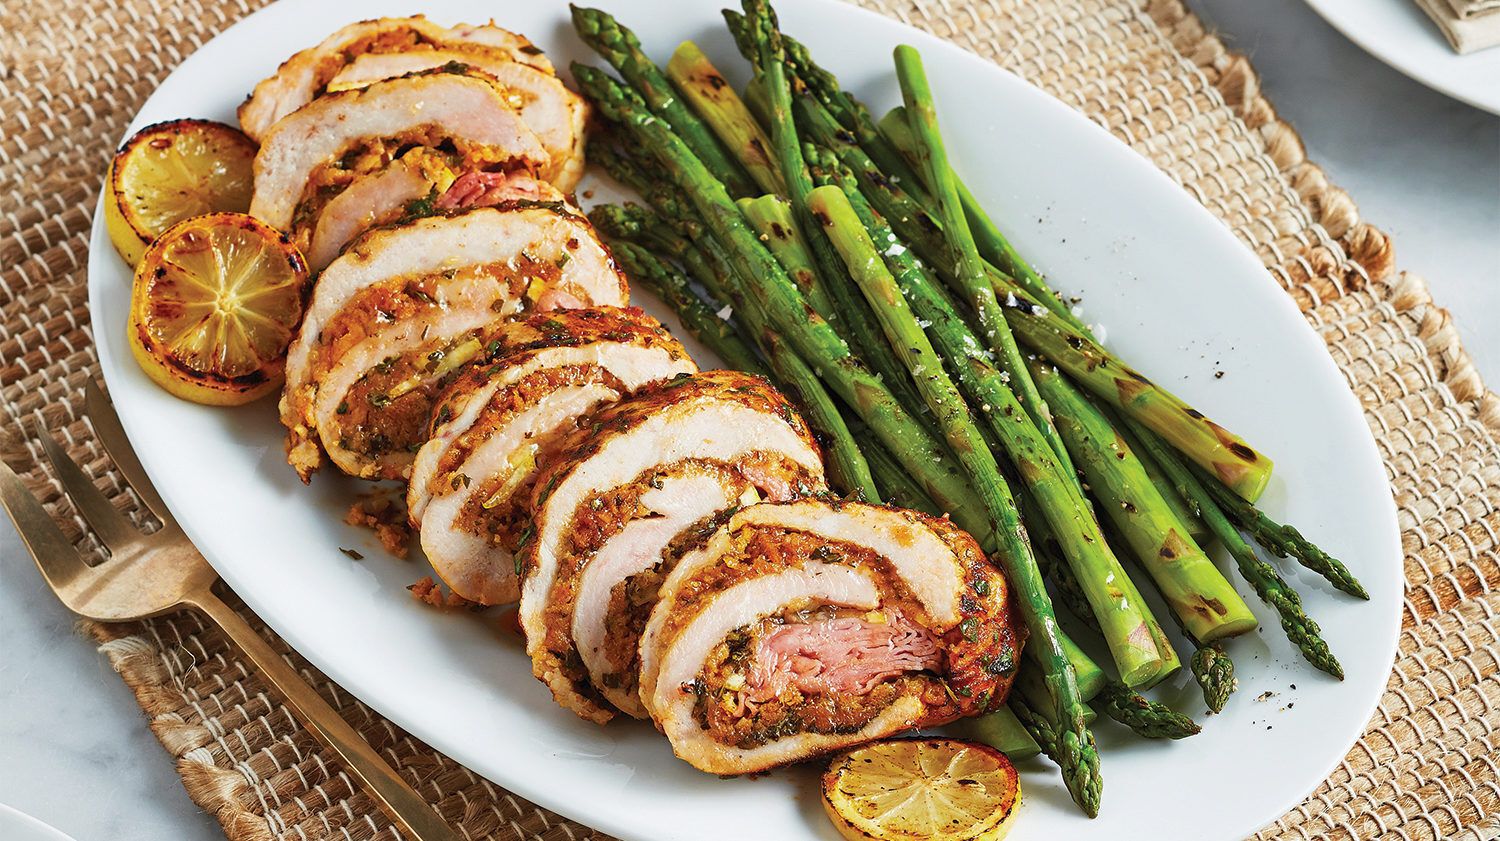 Read more about Grilled Lemon-Parsley Stuffed Turkey Breast & Asparagus